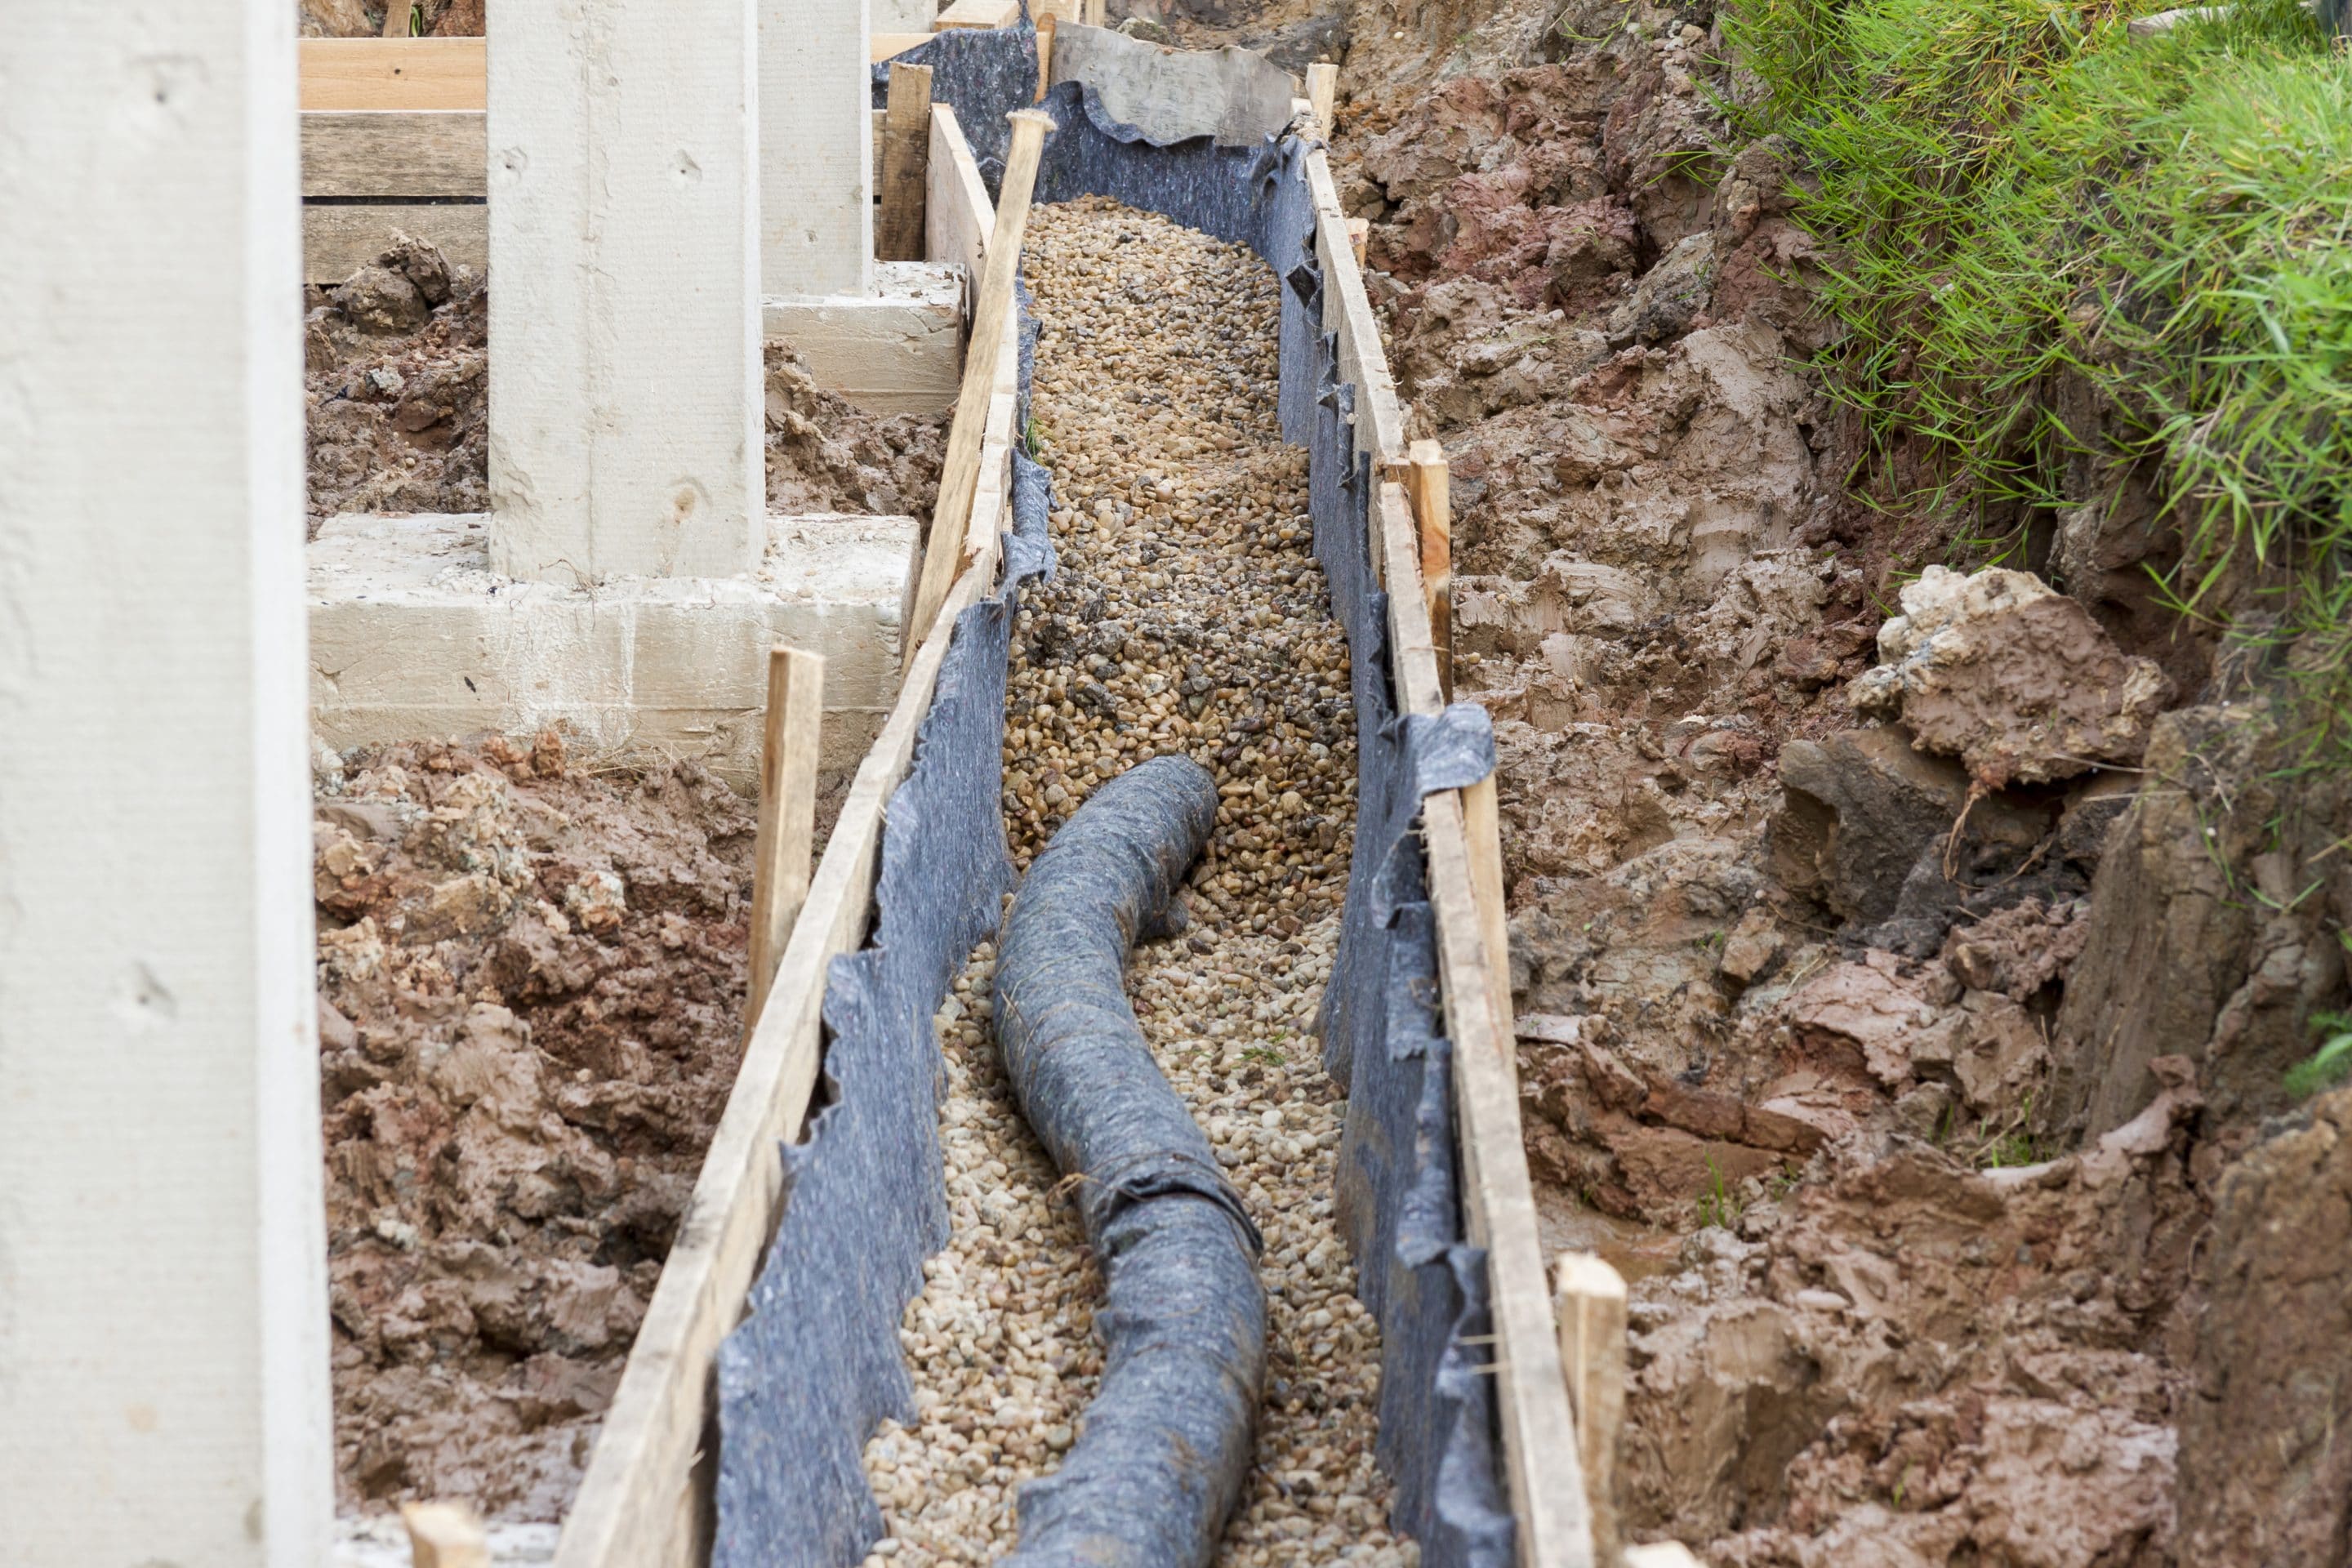 french drain cleaning